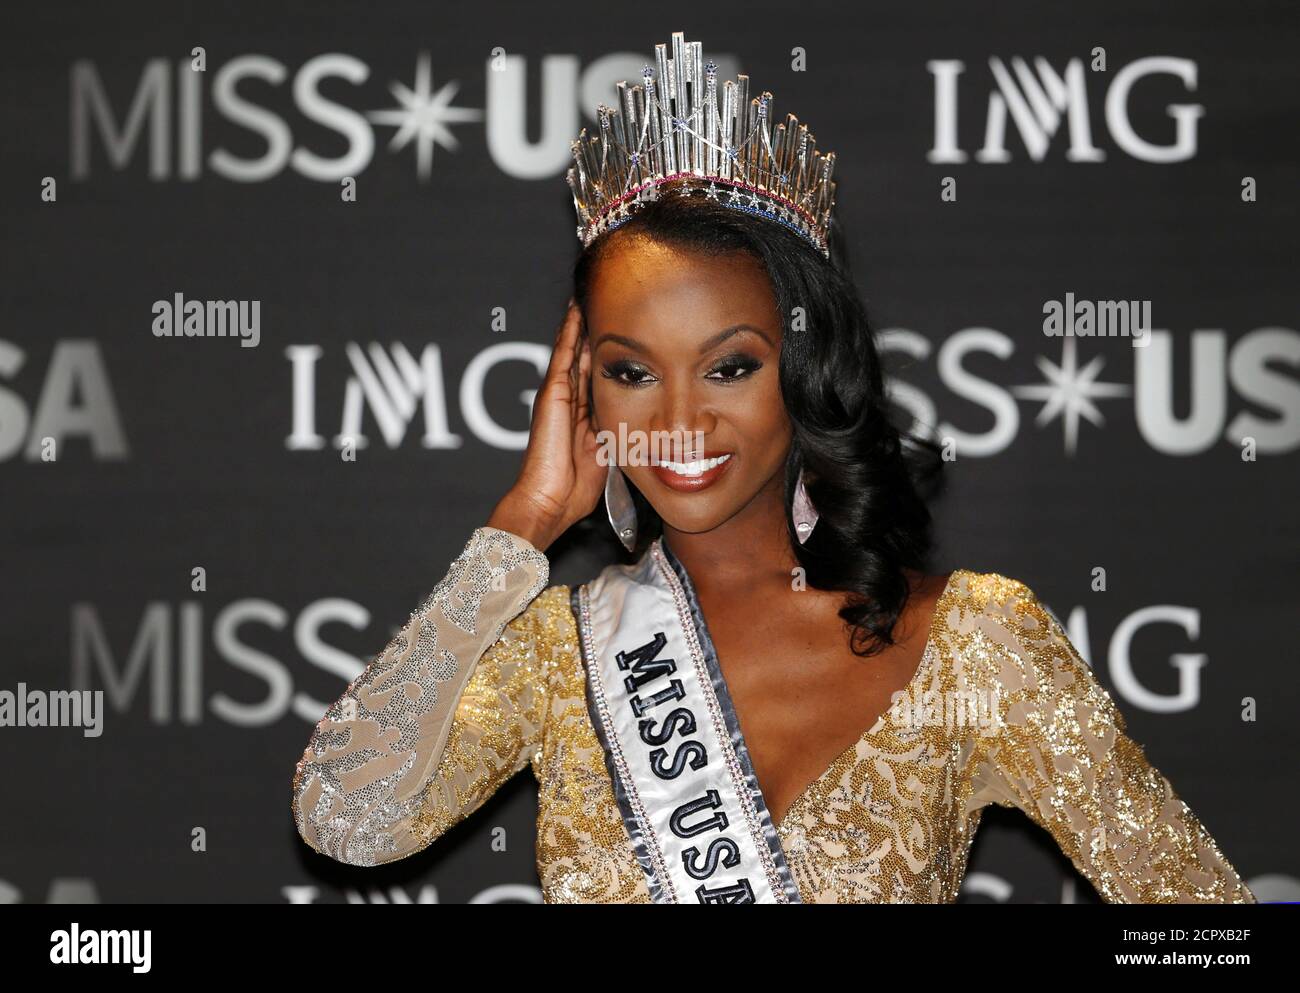 Deshauna Barber of the District of Columbia poses at a news conference after being crowned Miss USA 2016 during the 2016 Miss USA pageant at the T-Mobile Arena in Las Vegas, Nevada, U.S., June 5, 2016. REUTERS/Steve Marcus Stock Photo